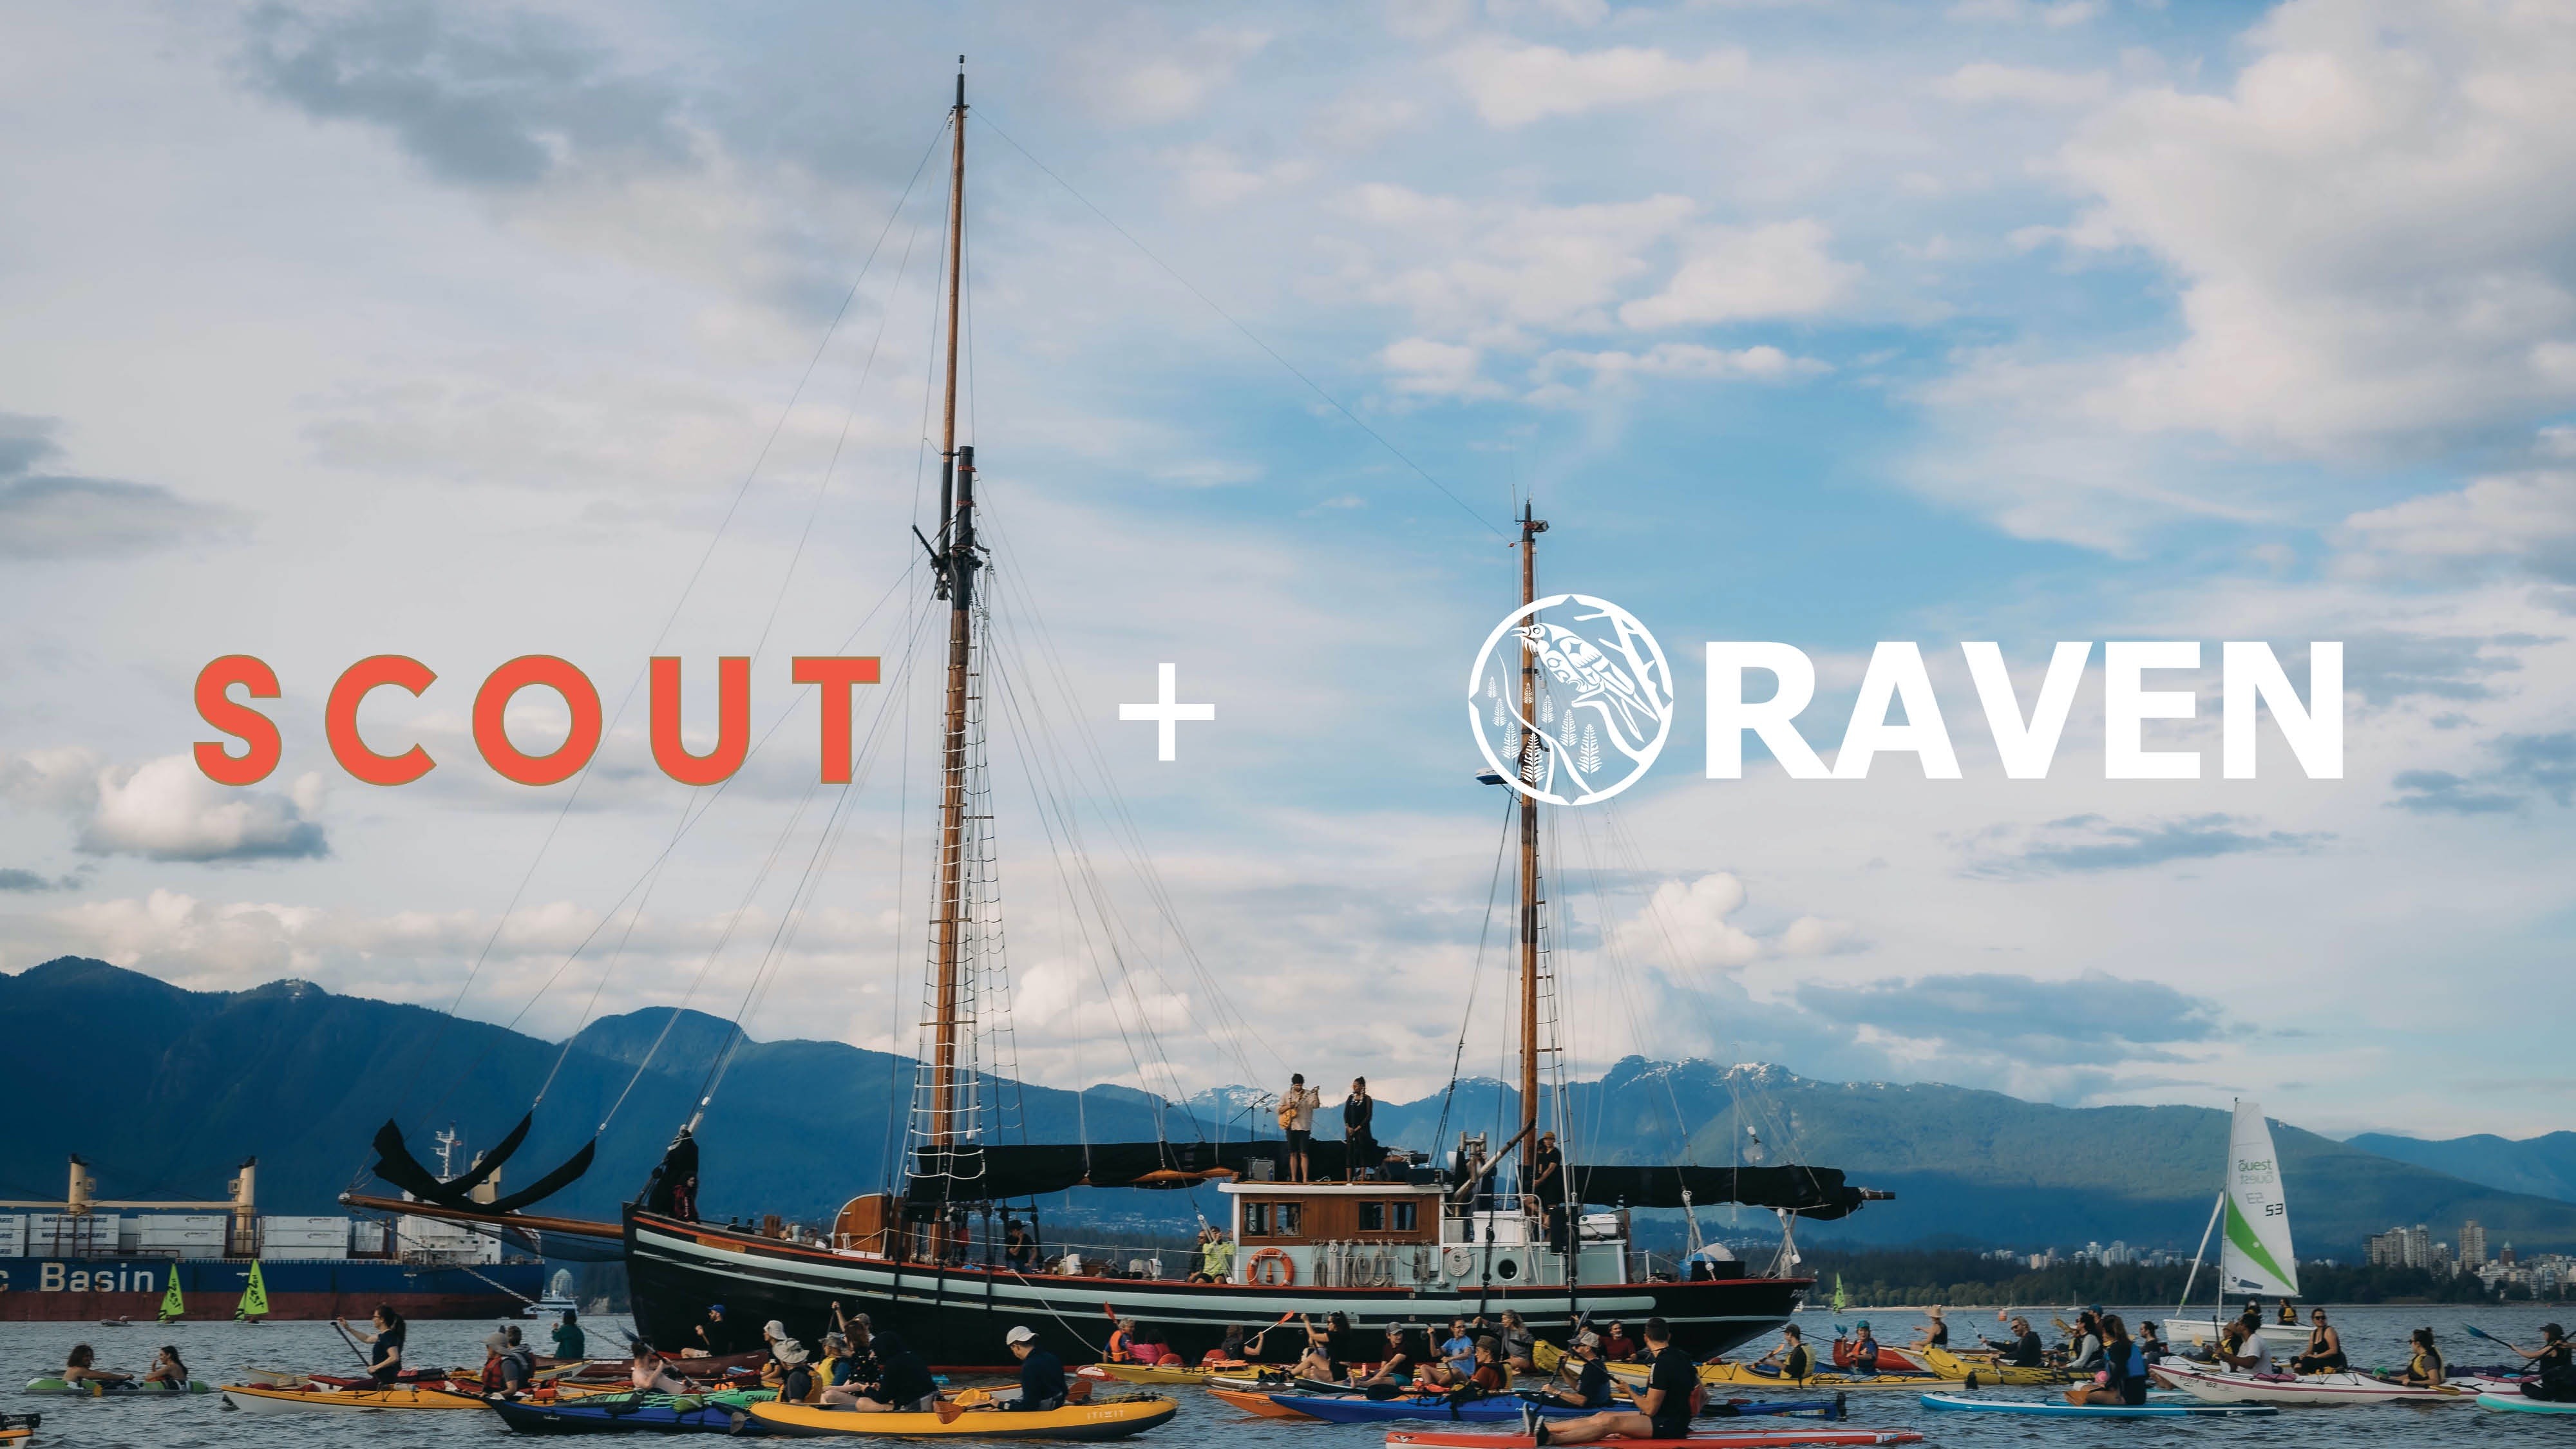 The providence tall ship anchored in the water surrounded by paddlers. The logos from "Scout" and "RAVEN" are centered across the image.